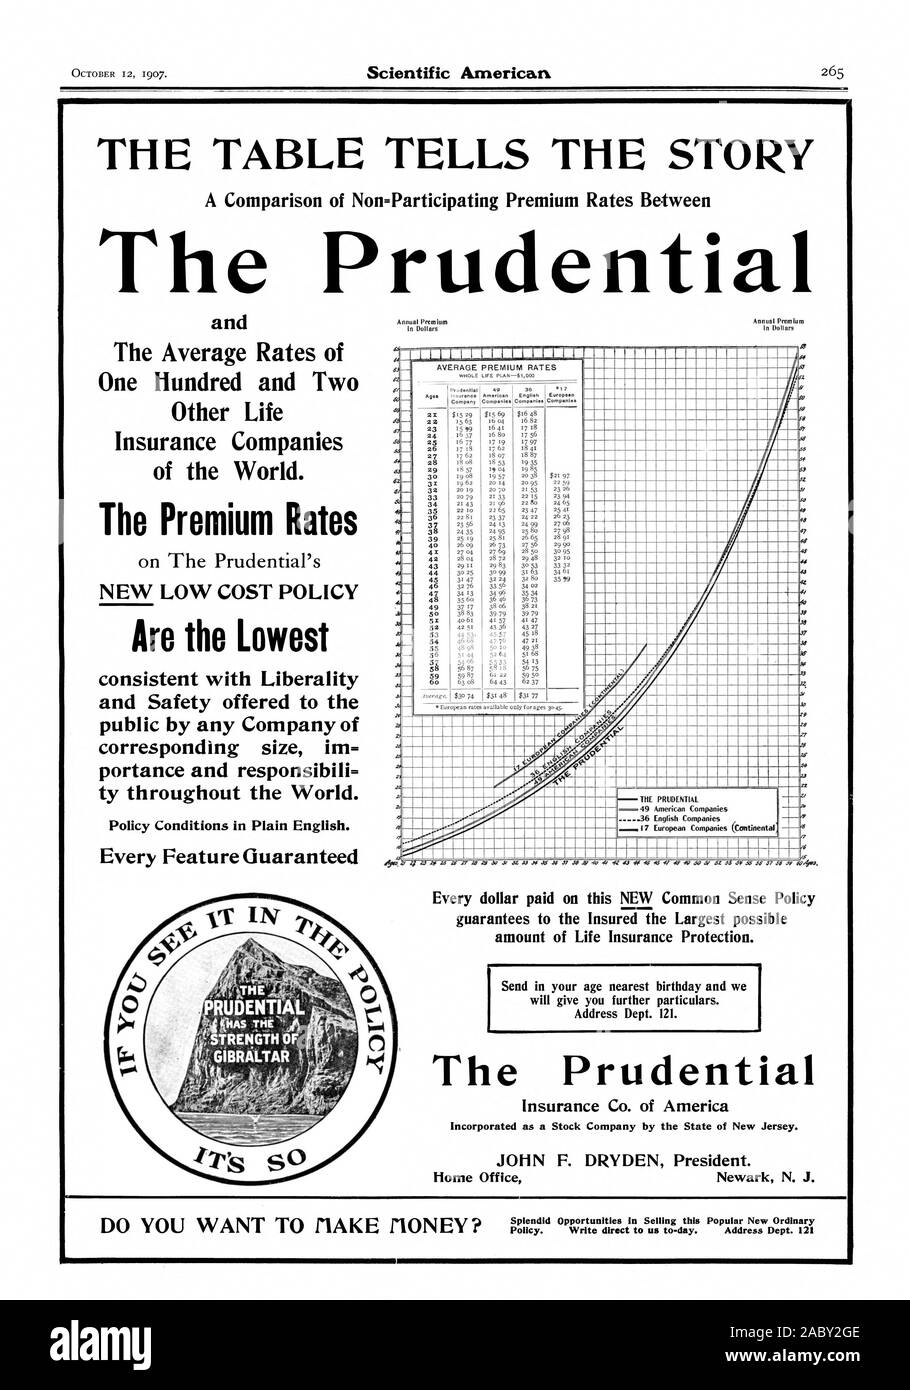 THE TABLE TELLS THE STORY A Comparison of Non=Participating Premium Rates Between The Prudential and The Average Rates of One Hundred and Tw Other Life Insurance Companies of the World. The Premium Rates Are the Lowest consistent with Liberality and Safety offered to the public by any Company of portance and responsibili= ty throughout the World. Policy Conditions in Plain English.  WA'  ' l` IL FM s604 1553 5950 al IA WI1 NNIMIEM =WM KIEANN . limms ipry or IIIII.!aiIPPdr.:j lill Nesig  H Every dollar paid on this NEW Common Sense Policy guarantees to the Insured the Largest possible amount of Stock Photo